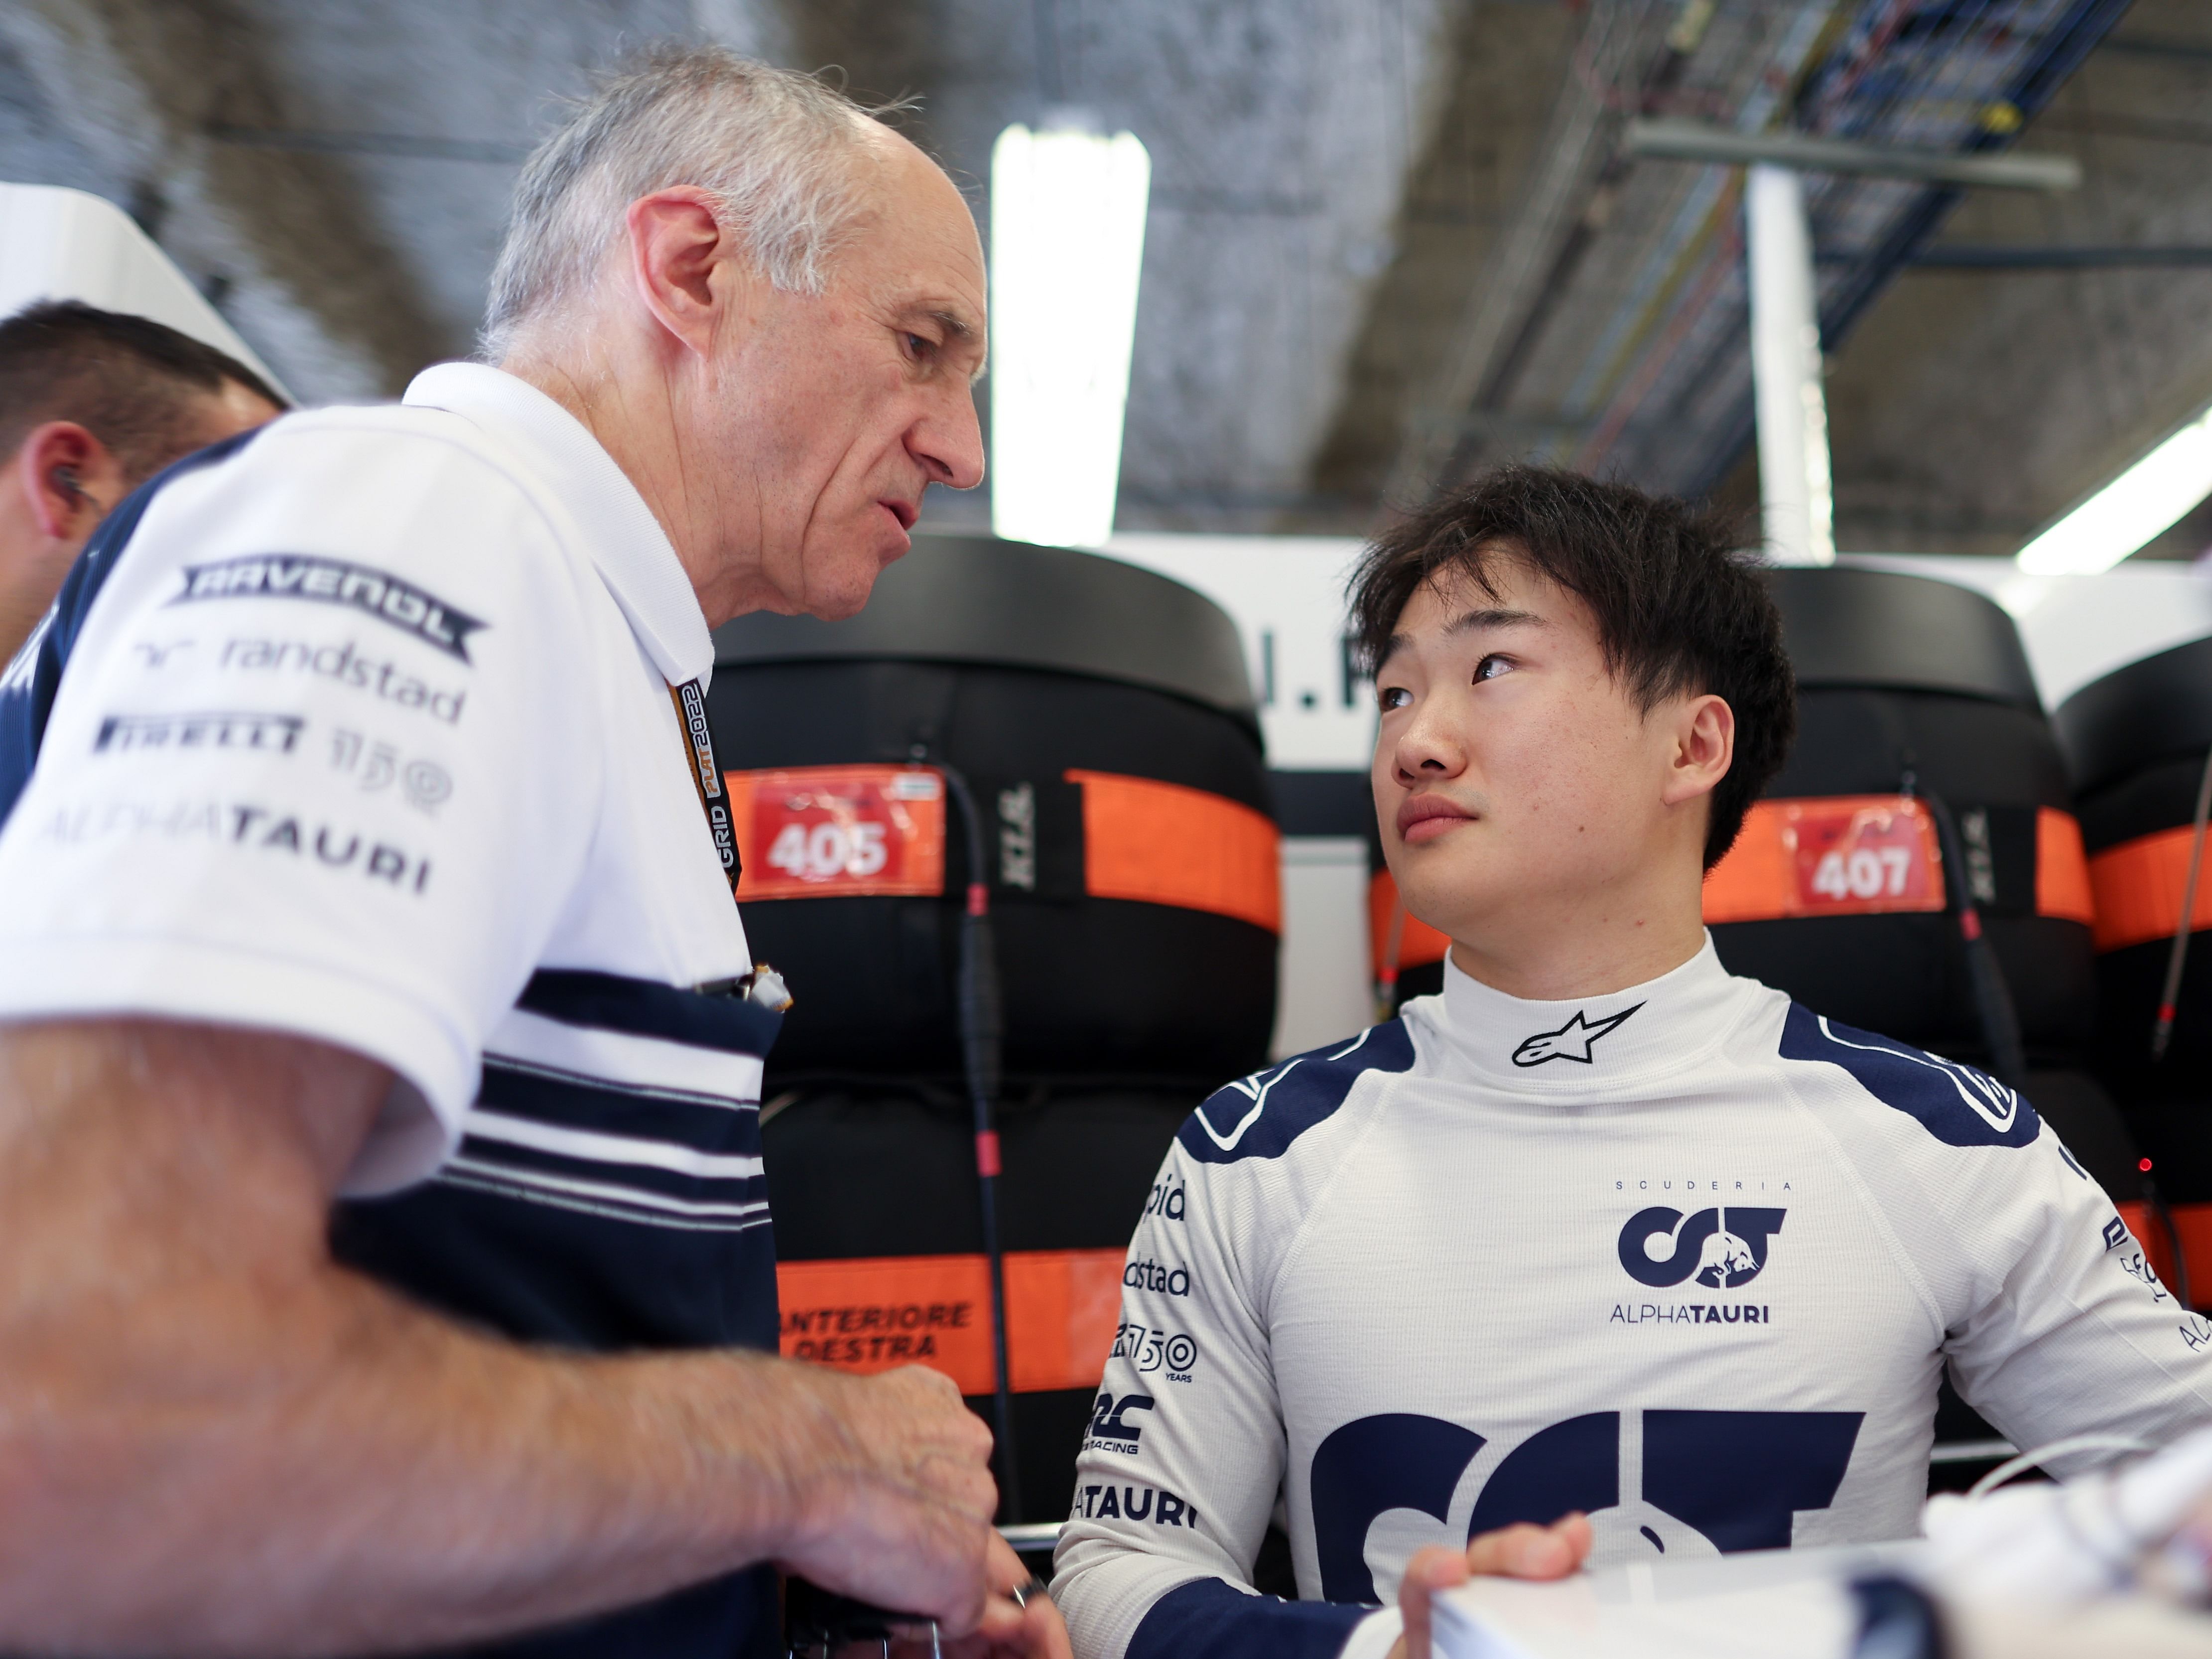 Yuki Tsunoda talks with Franz Tost in the garage during qualifying ahead of the 2022 F1 USA Grand Prix. (Photo by Peter Fox/Getty Images)